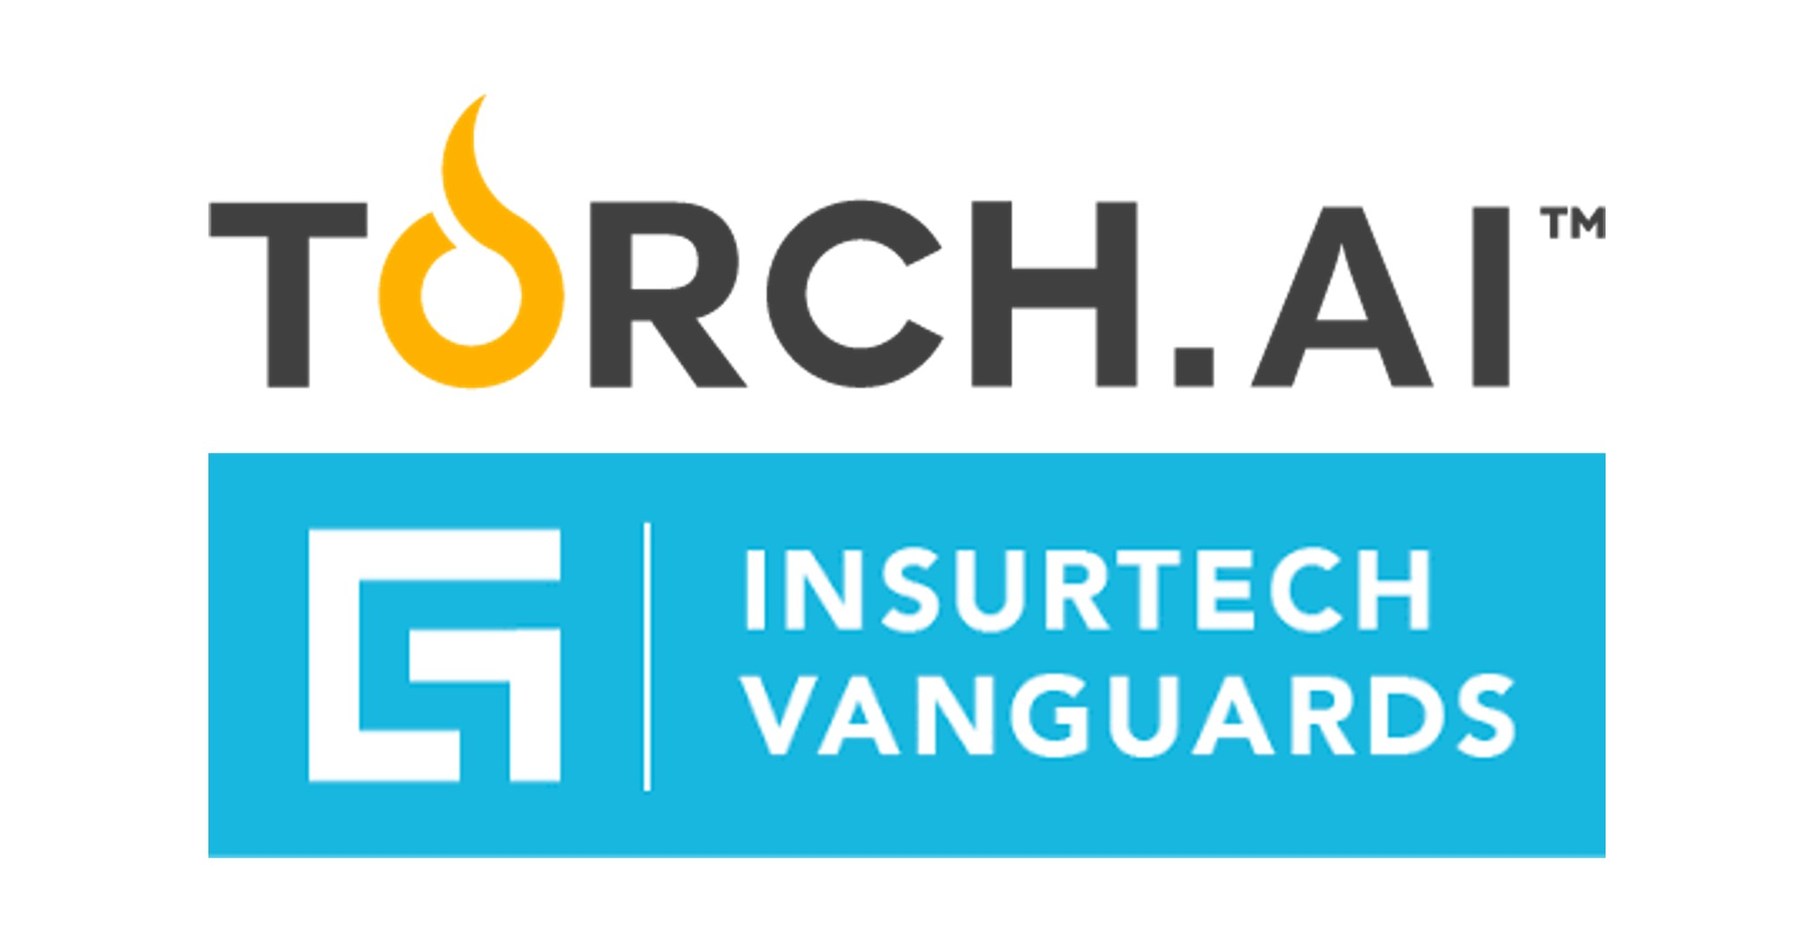 Torch.AI Joins Guidewire's Insurtech Vanguards Program, Brings Data Infrastructure AI to Guidewire's Insurance Network of Nearly 50 Partners